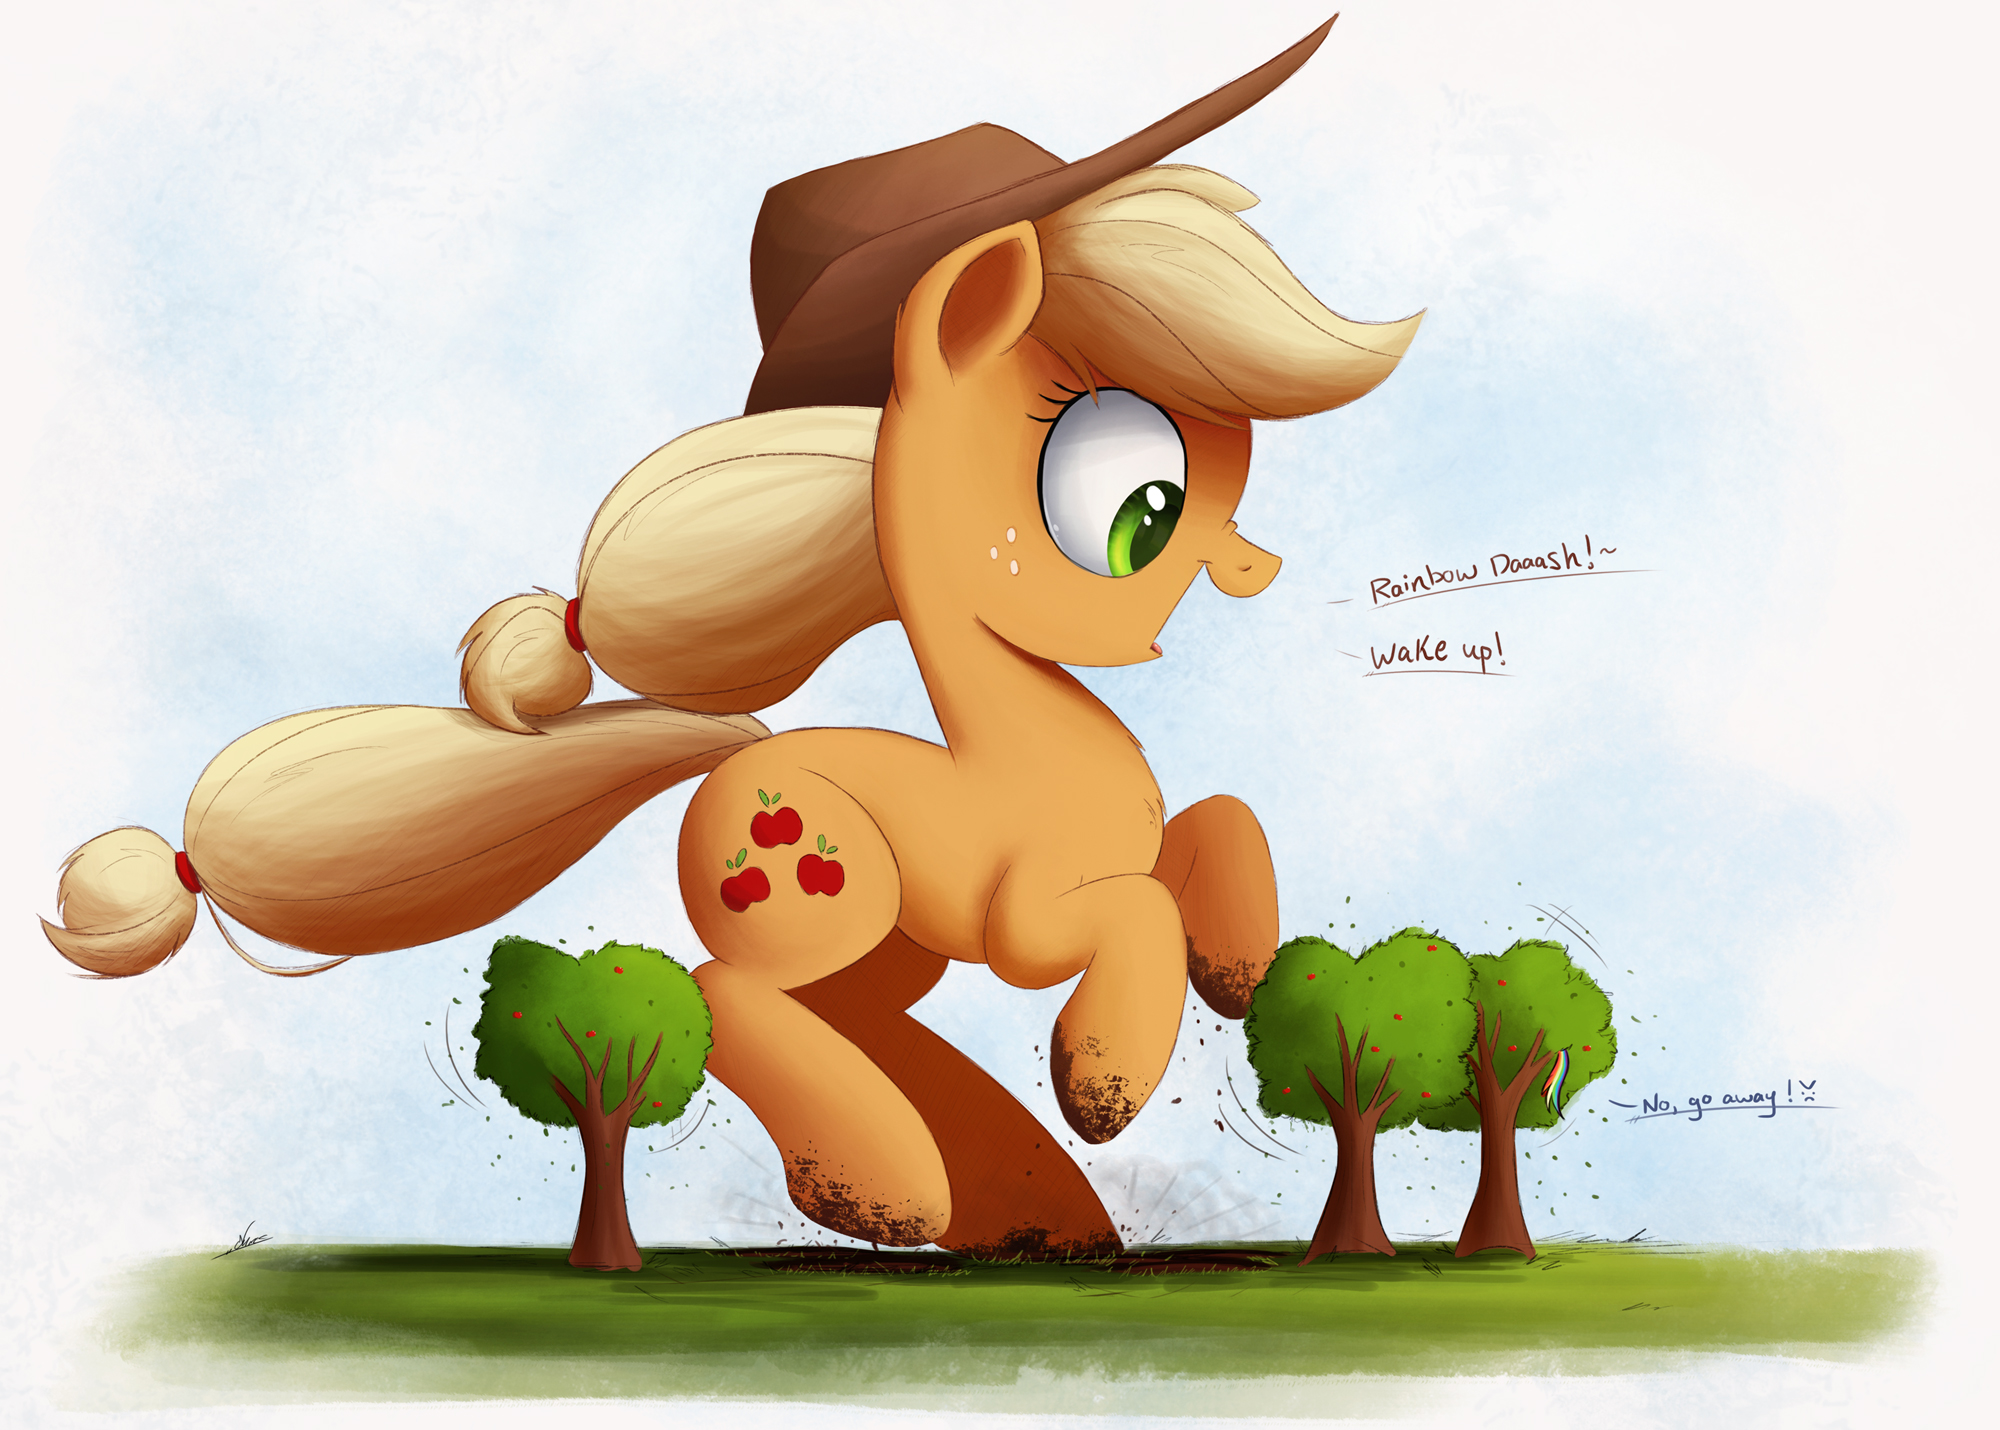 big_apple_is_silly_apple_by_ncmares-d9xk